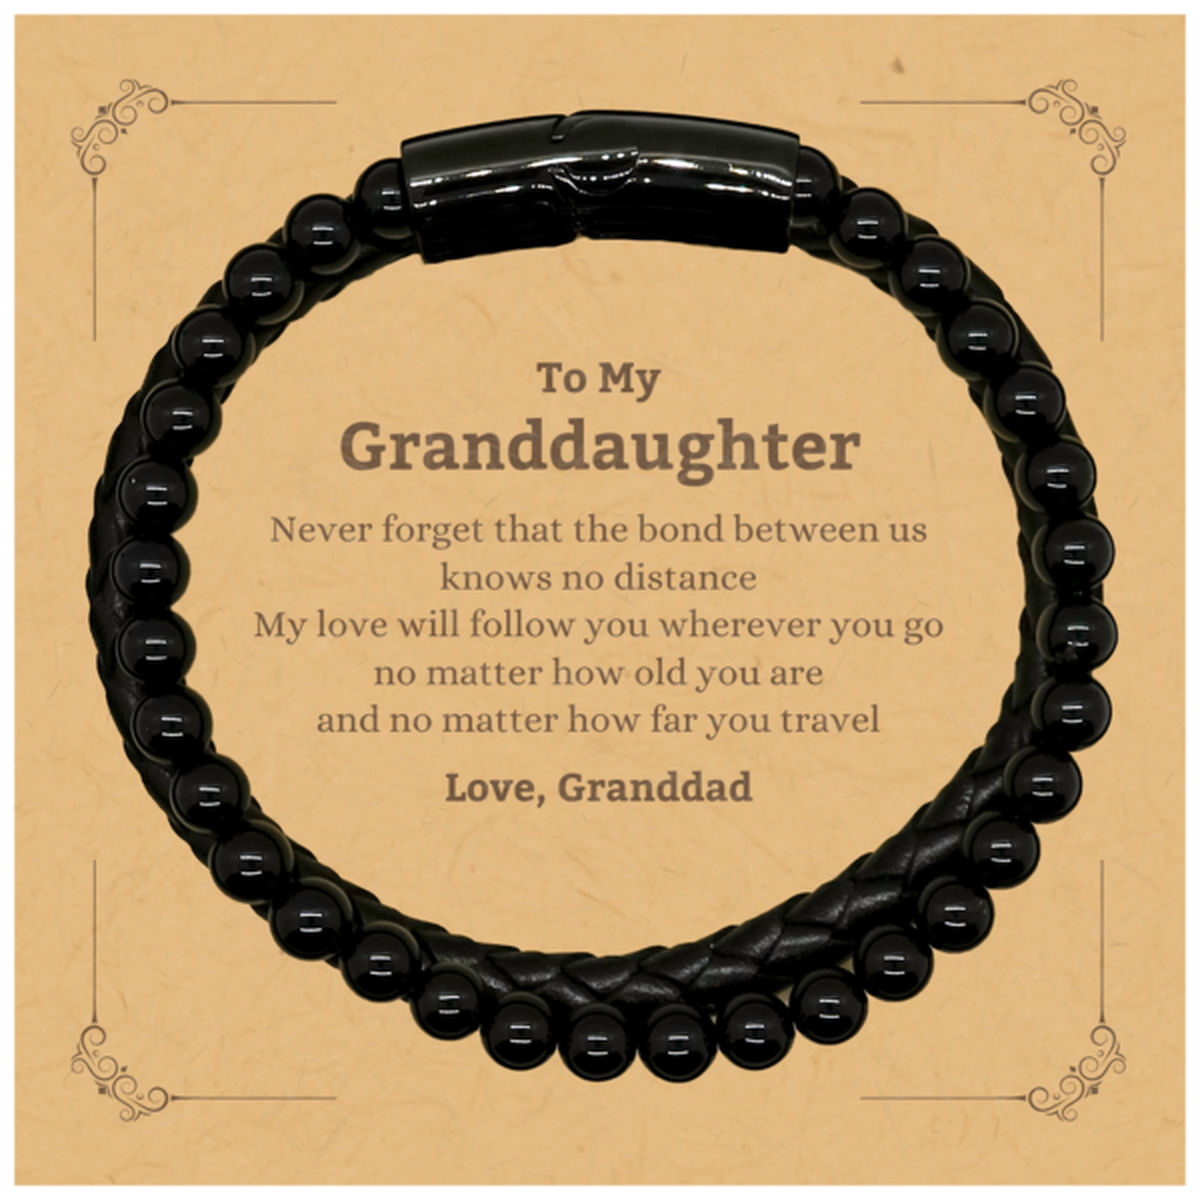 Granddaughter Birthday Gifts from Granddad, Adjustable Stone Leather Bracelets for Granddaughter Christmas Graduation Unique Gifts Granddaughter Never forget that the bond between us knows no distance. Love, Granddad